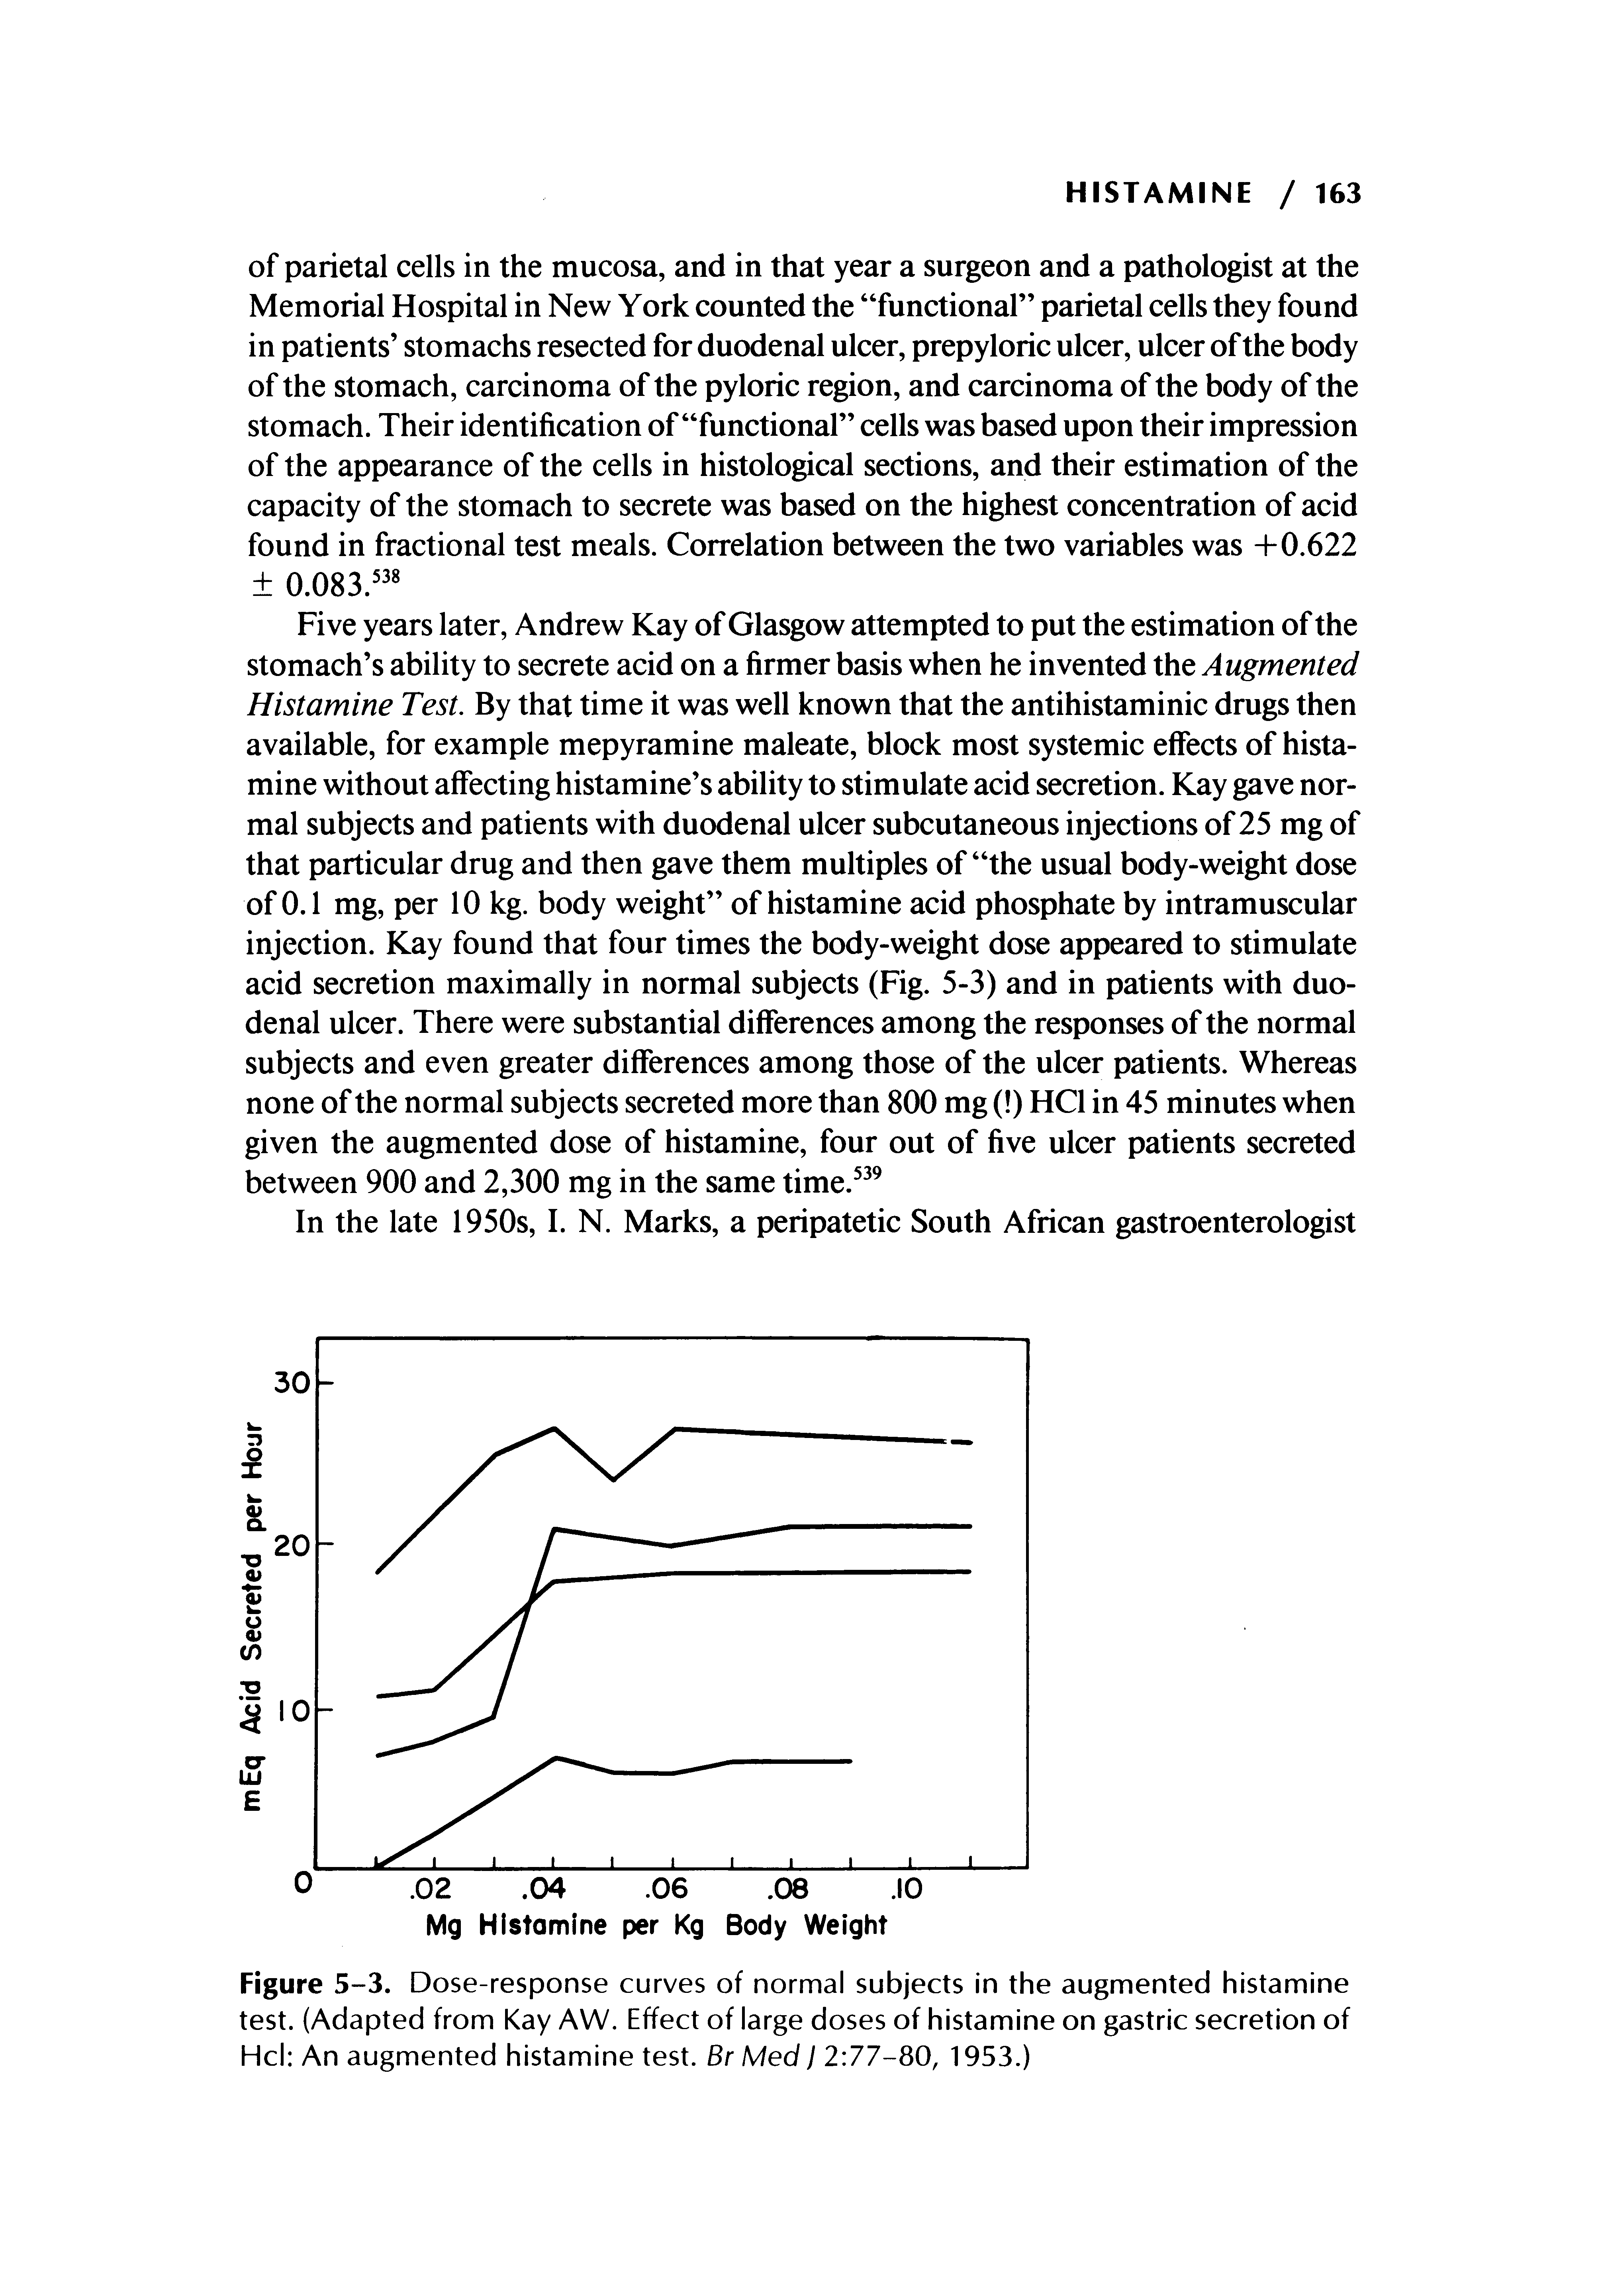 Figure 5-3. Dose-response curves of normal subjects in the augmented histamine test. (Adapted from Kay AW. Effect of large doses of histamine on gastric secretion of Hcl An augmented histamine test. Br Med I 2 77-80, 1953.)...